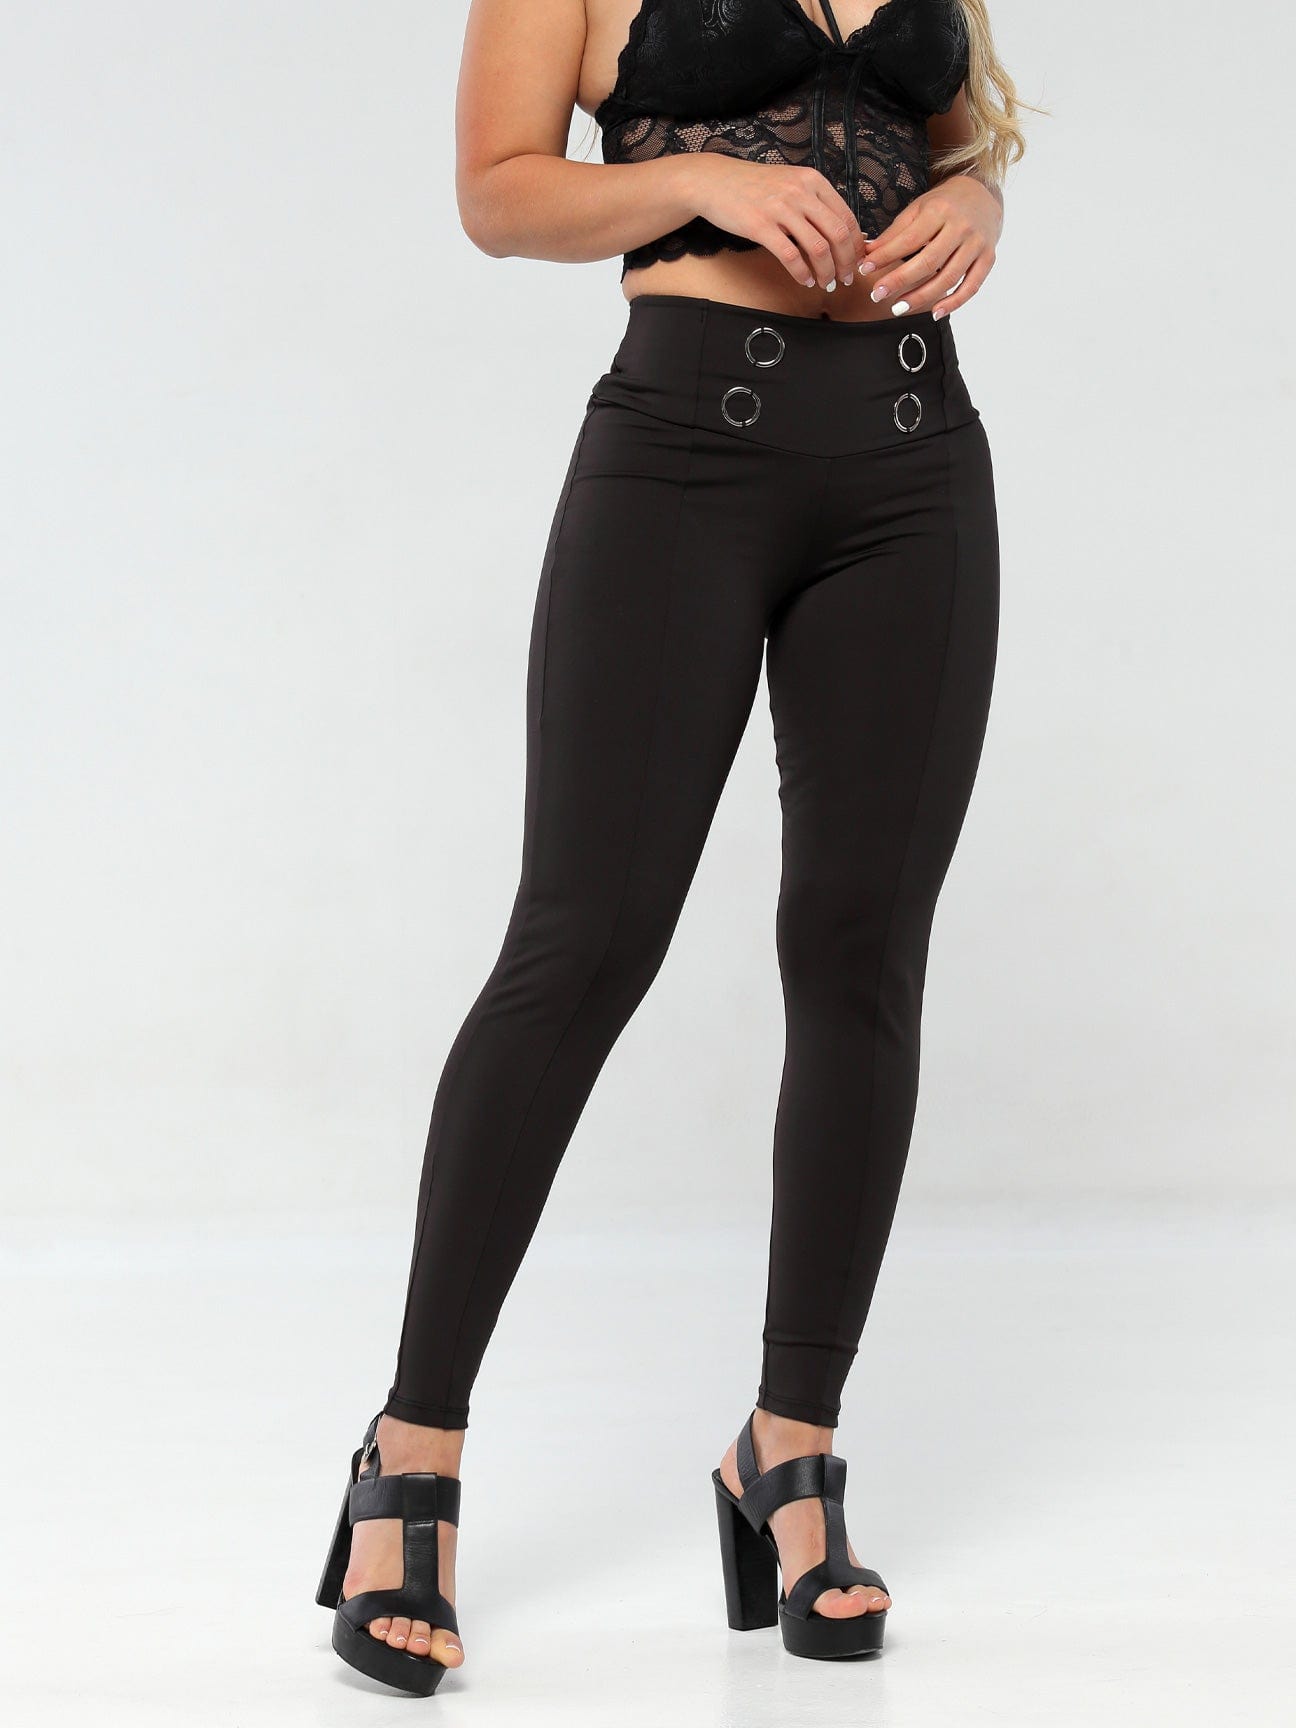 Grease Lightning Butt Lift Leggings with Tummy Control 1279